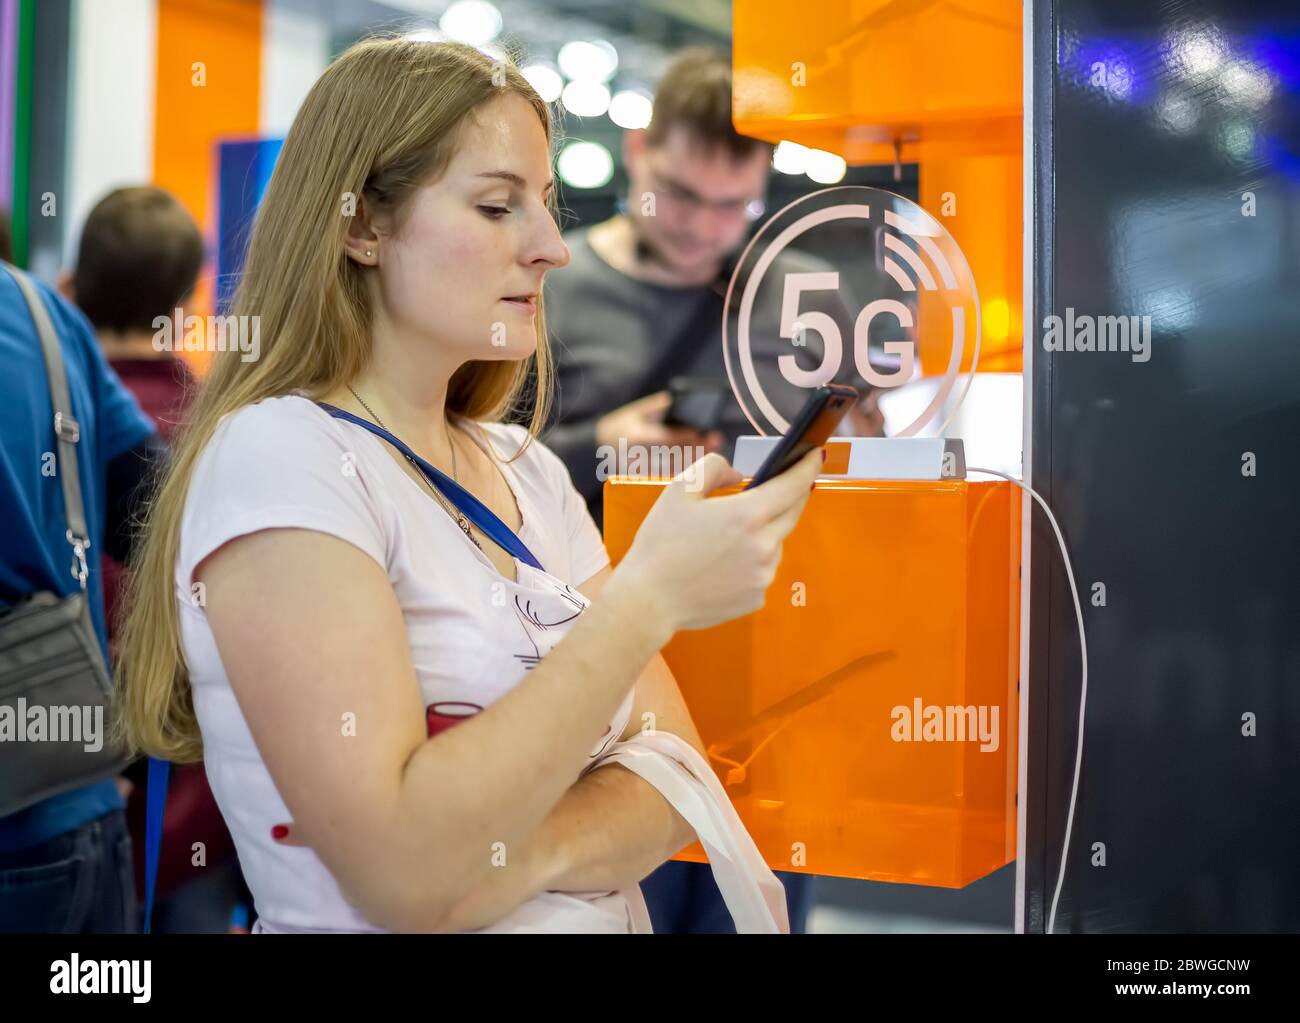 young caucasian girl surfs the internet on a smartphone on the background of the 5g icon xiaomi. blur background, soft focus Stock Photo